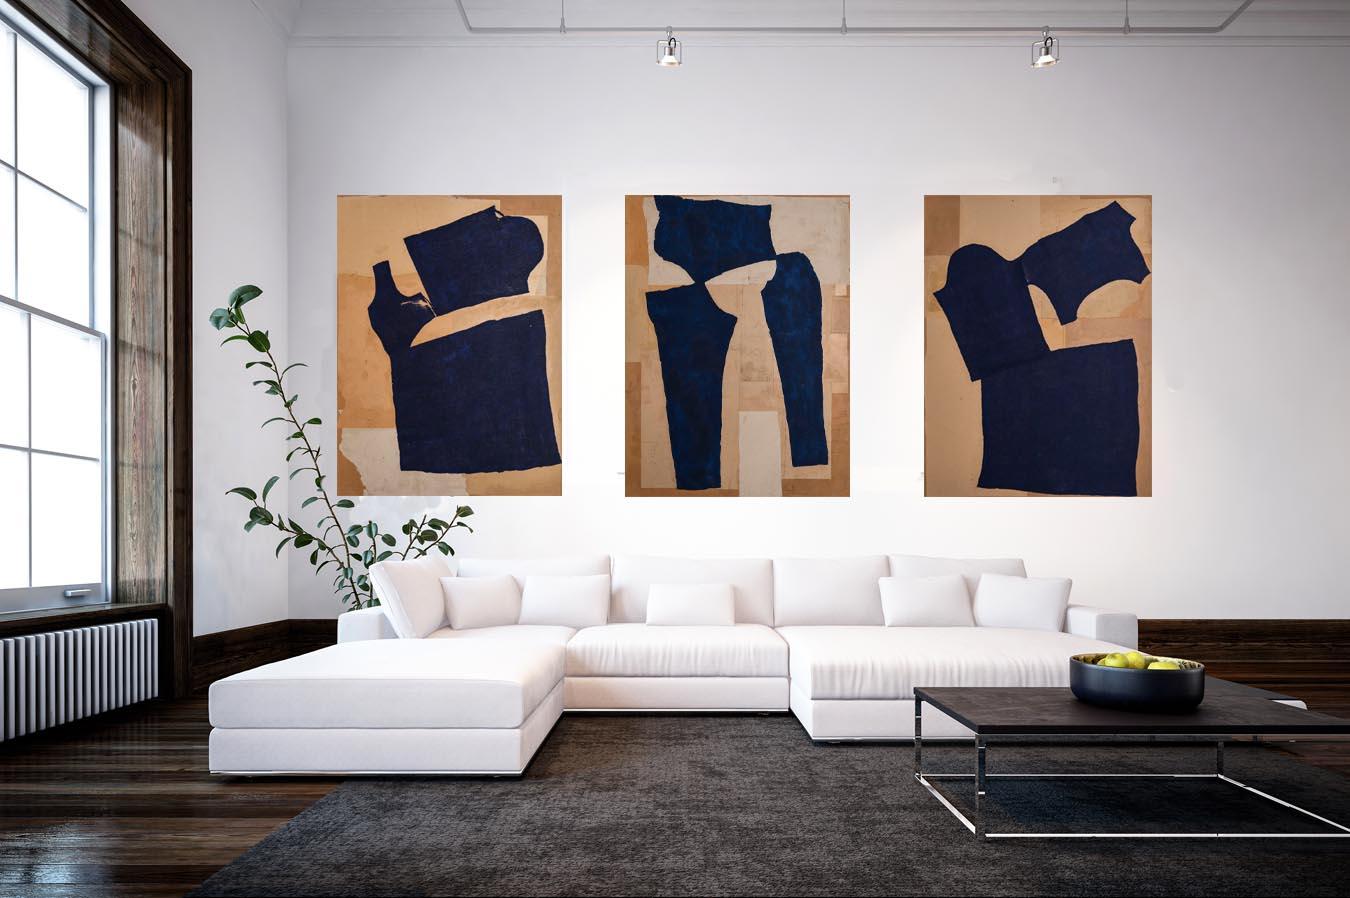 Undone series, large blue abstract cut outs , Triptych, fashion art collage, - Art by Nicola Grellier